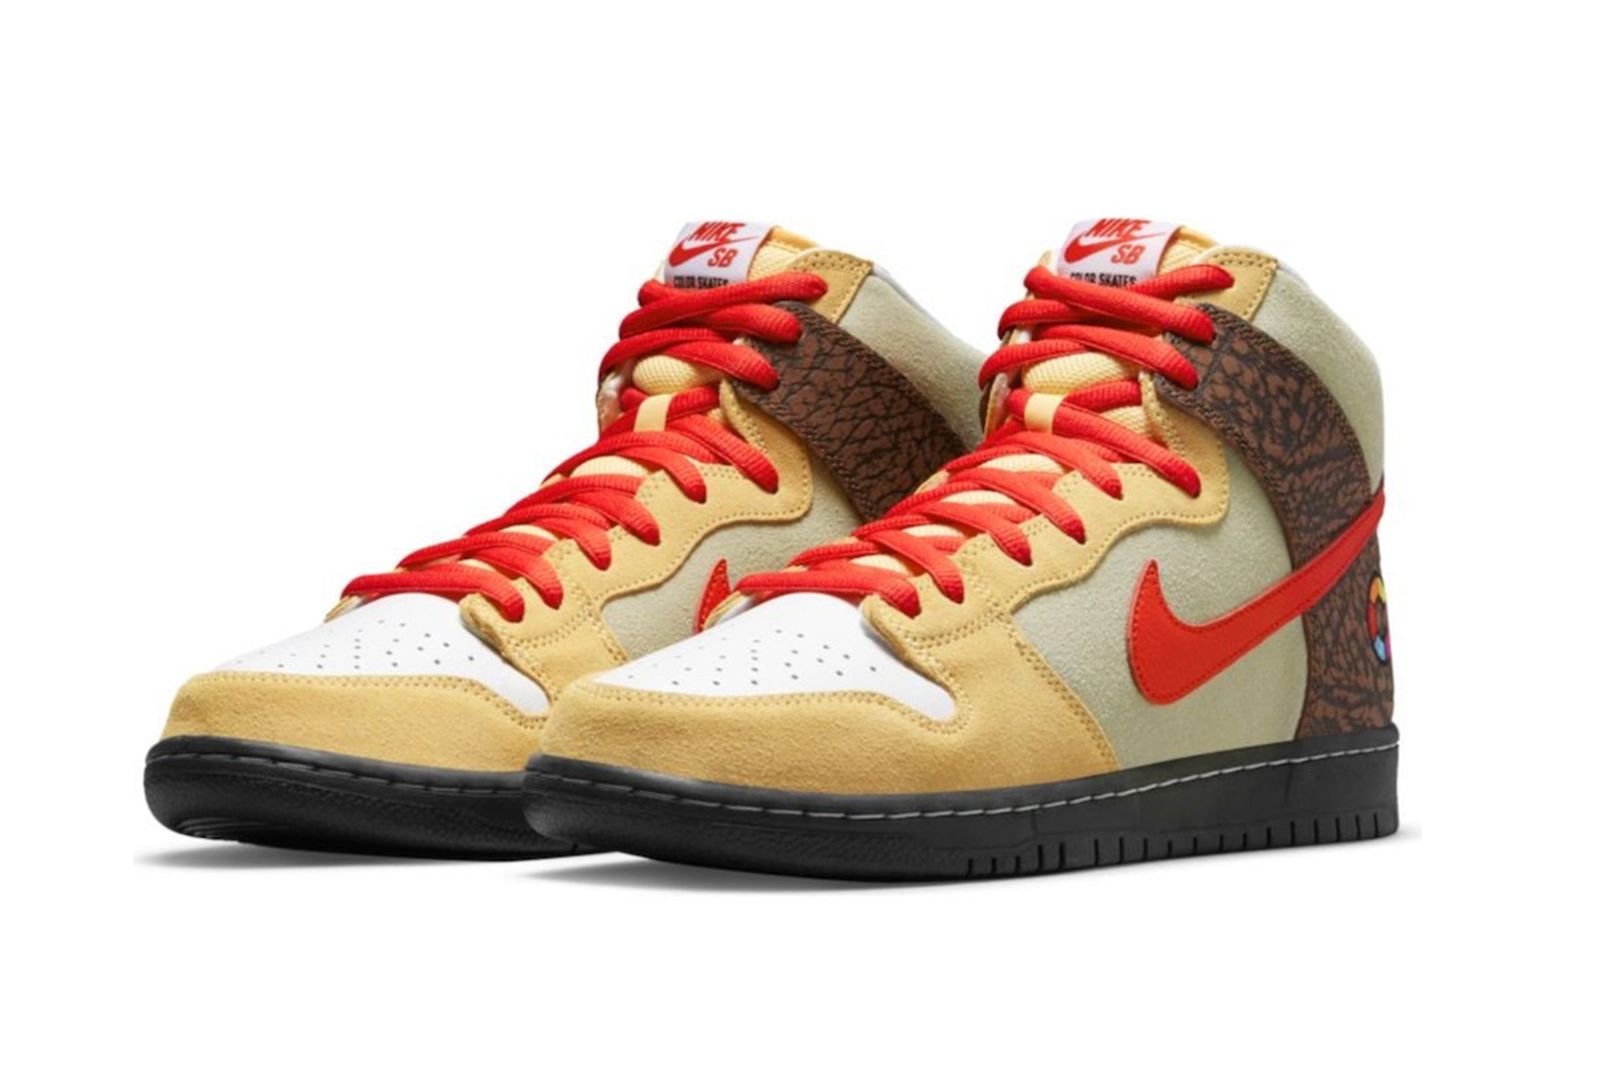 color-skates-nike-sb-dunk-high-release-date-price-06